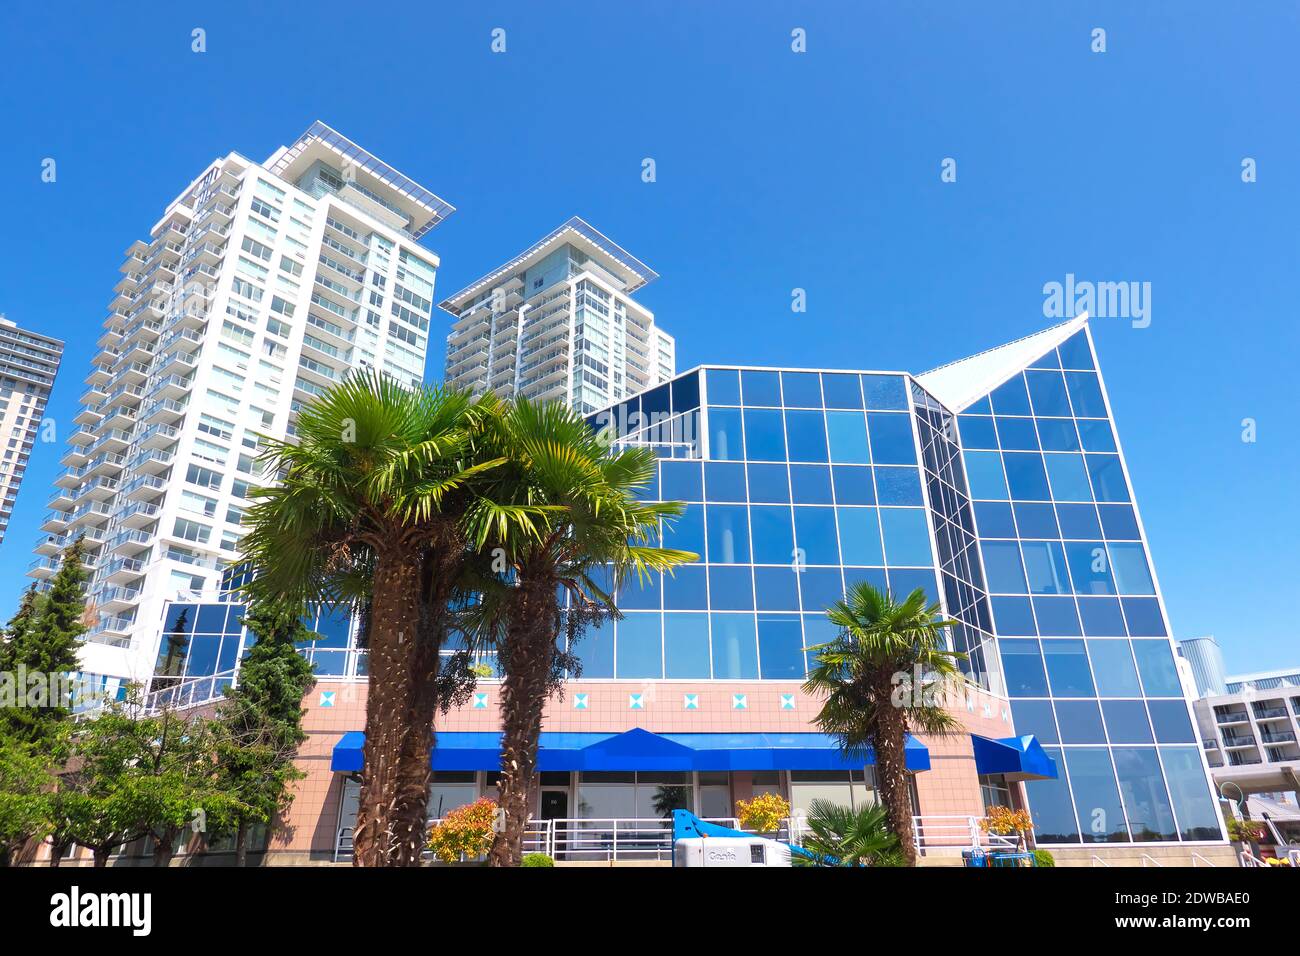 Glass-fronted building and apartment building with Palm trees in front against a blue sky. Stock Photo